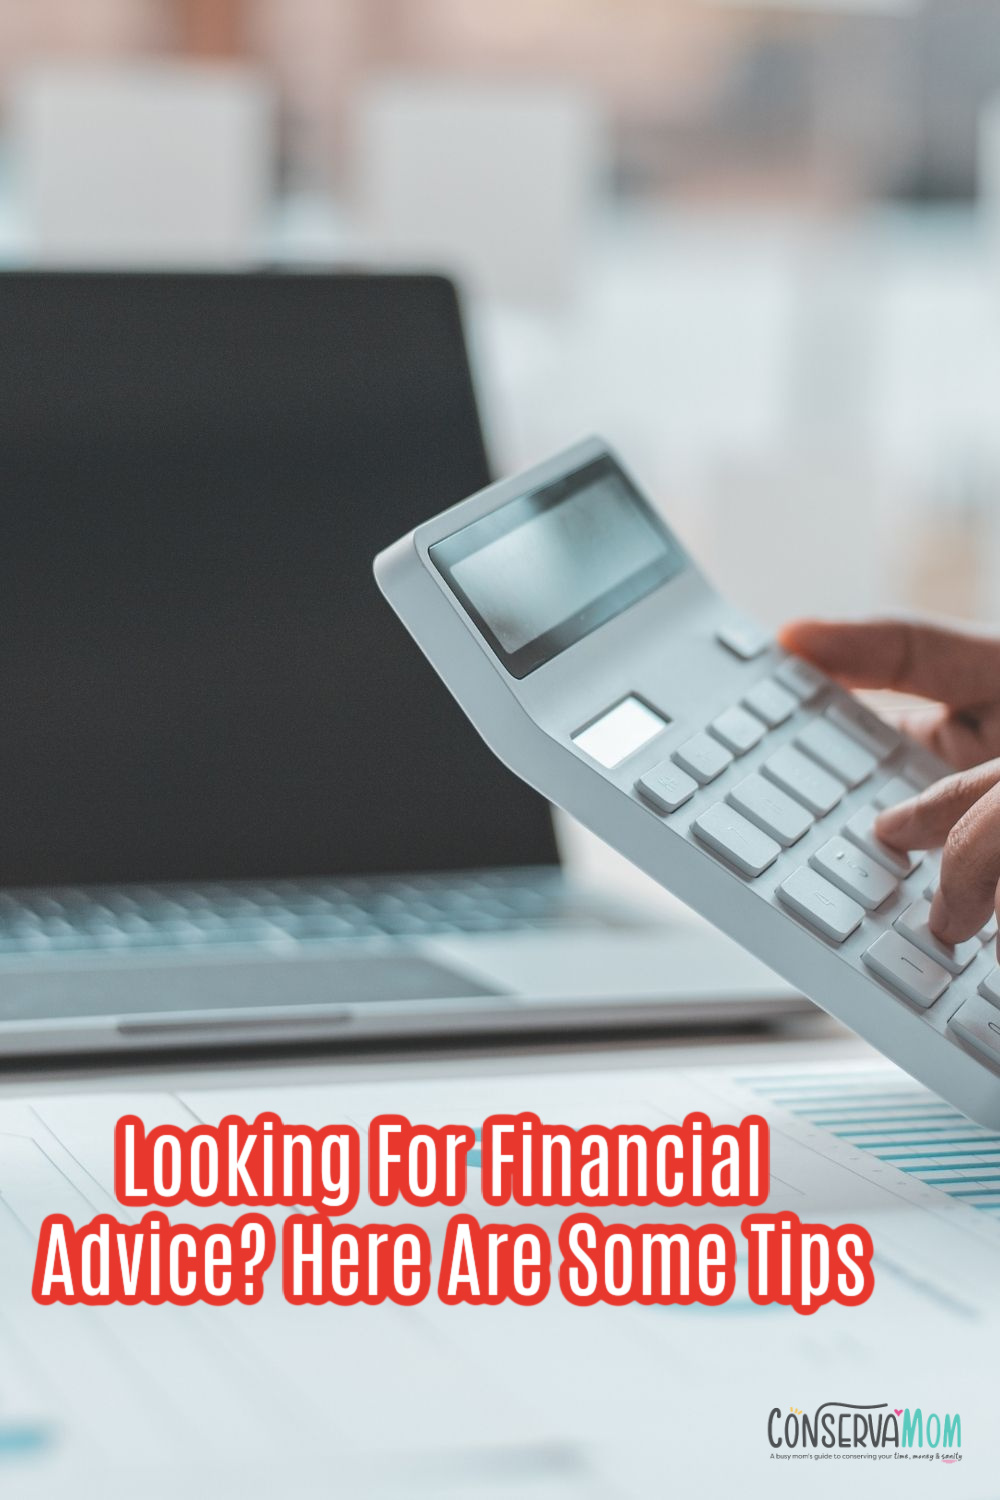 Looking For Financial Advice? Here Are Some Tips